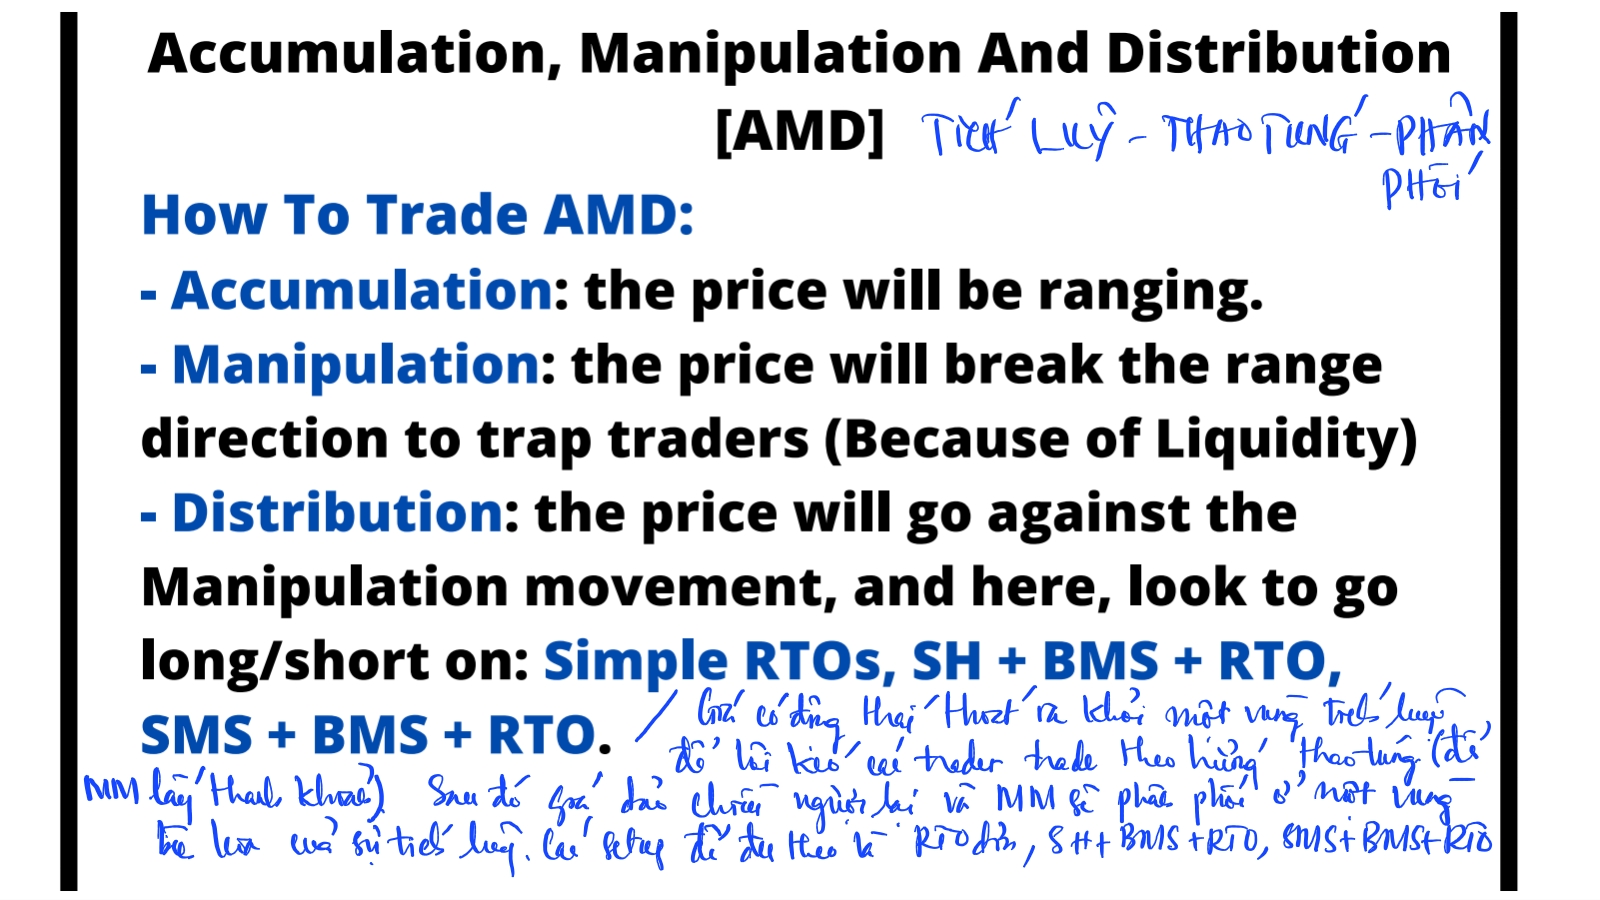 099 VN Market_Structure_And_Powerful_Setups - SMC Trad_220923_084424.jpg